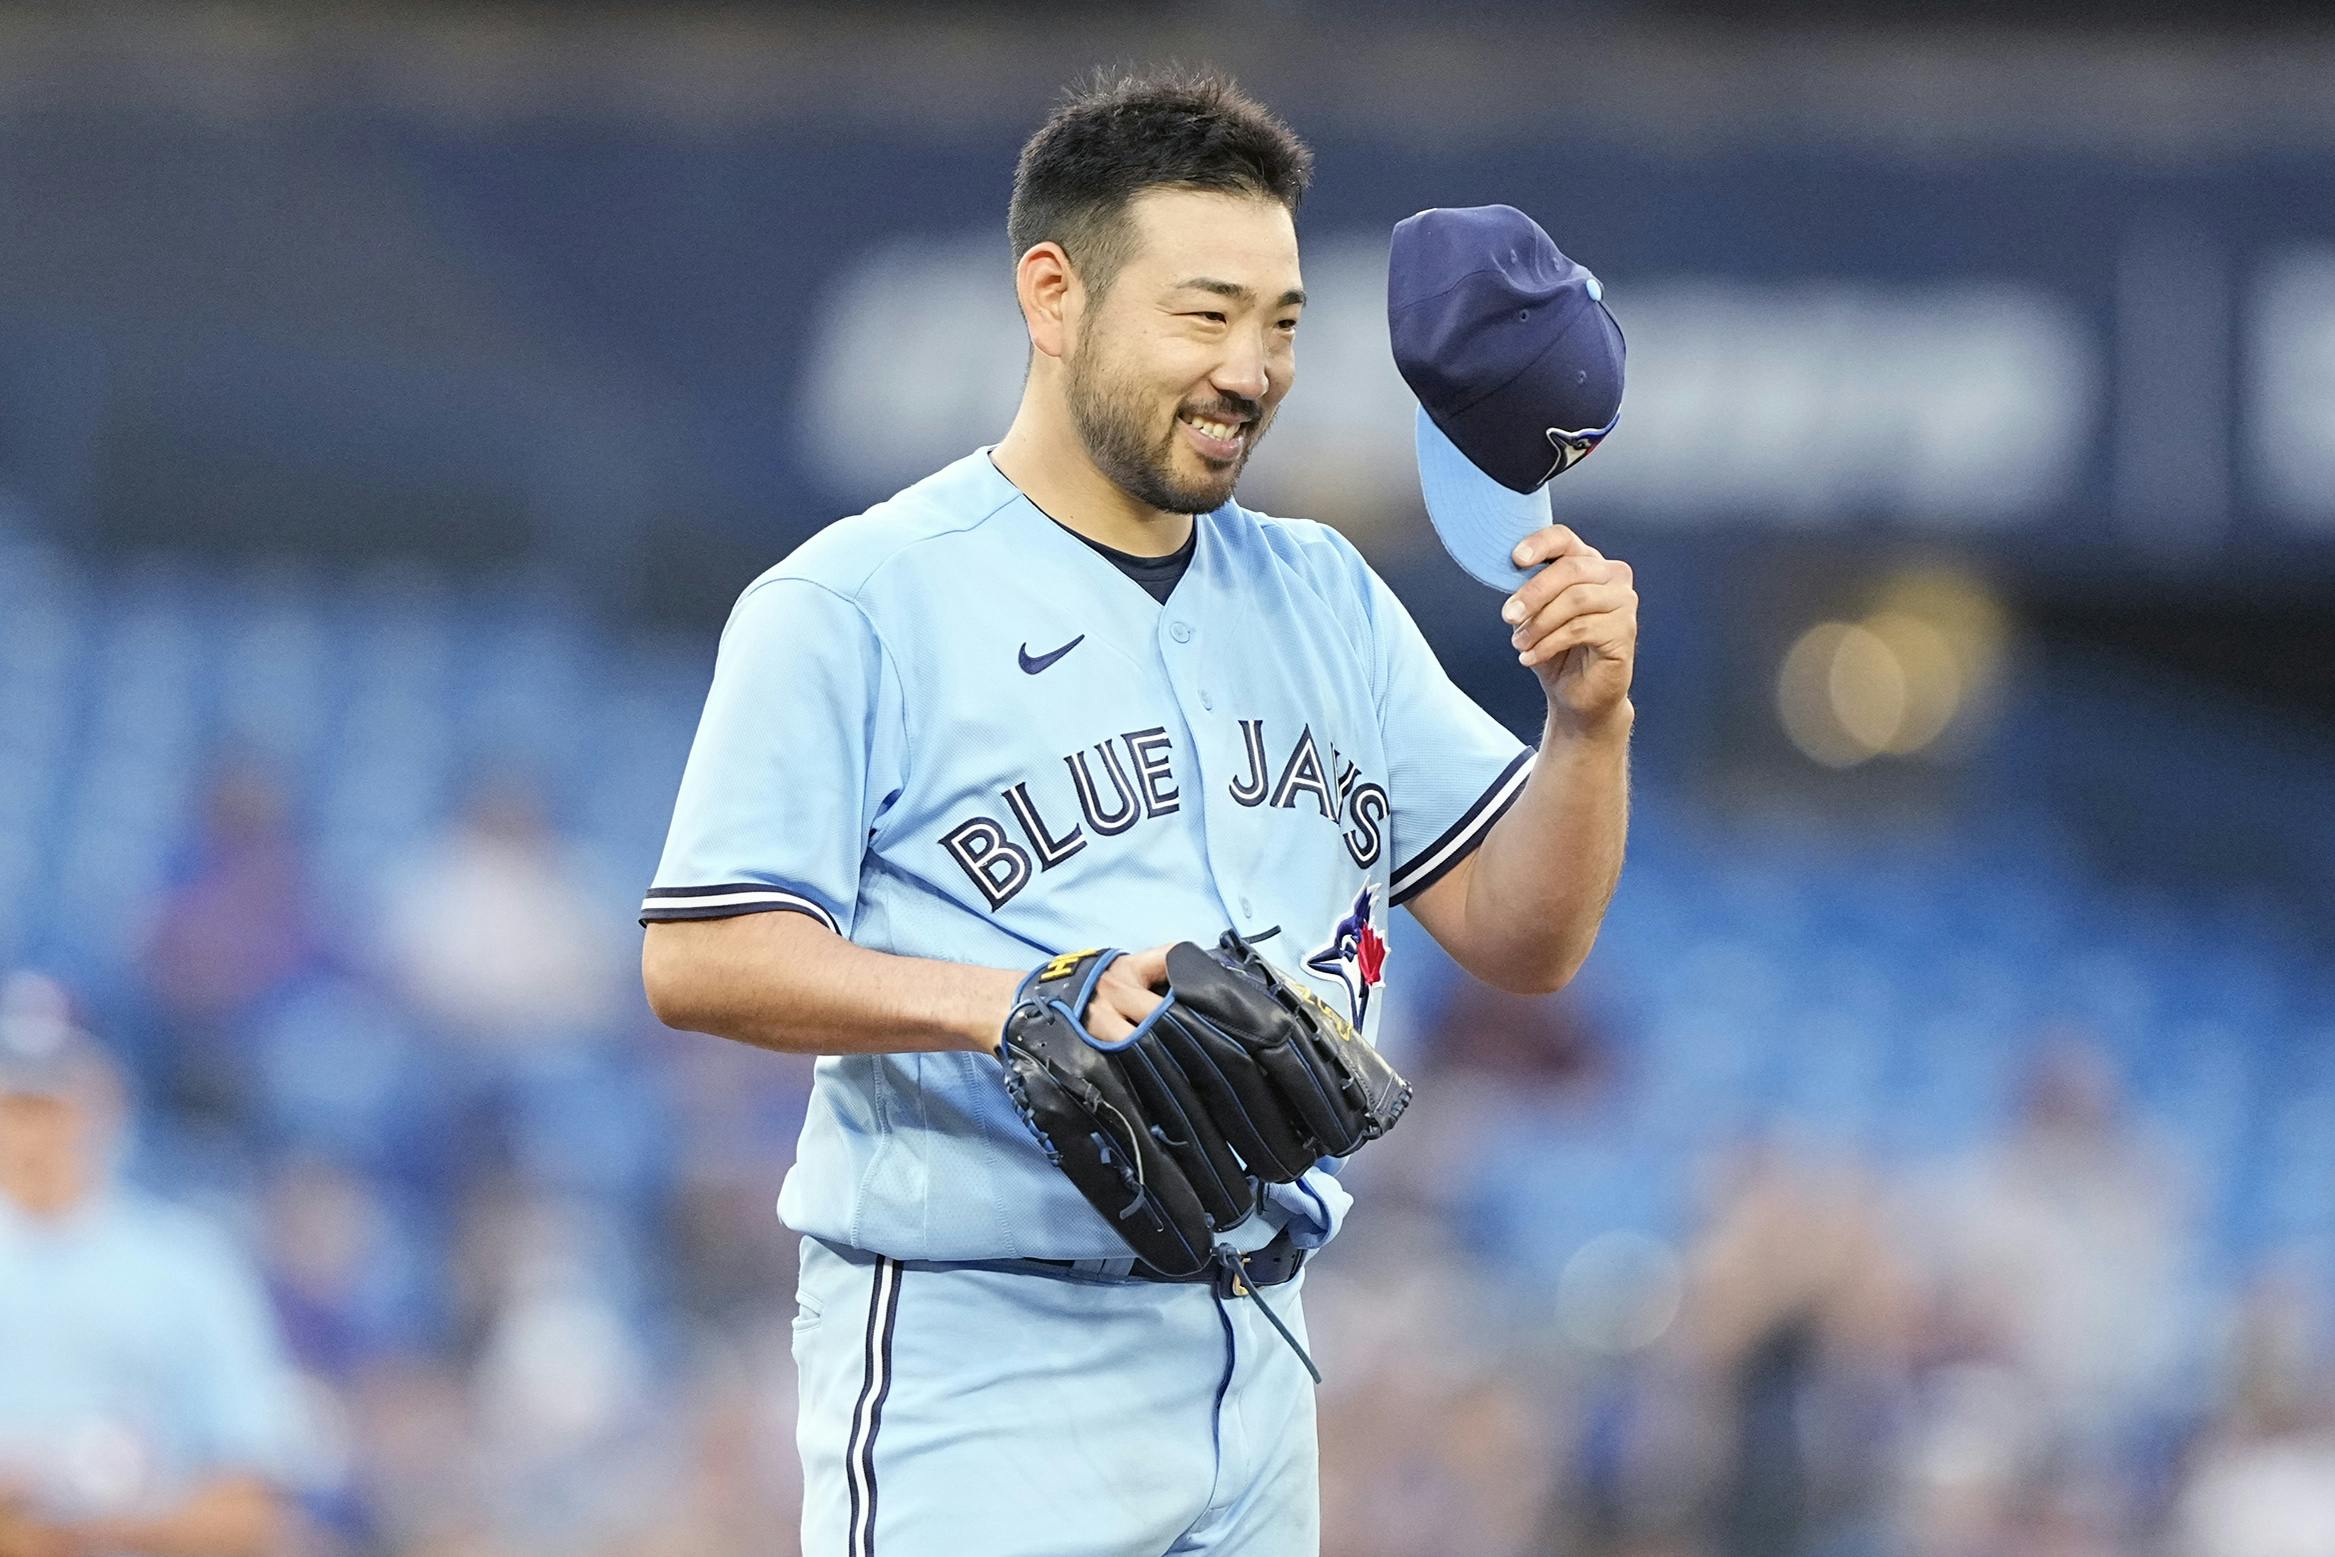 Yusei Kikuchi will get the start on Canada Day for the Blue Jays